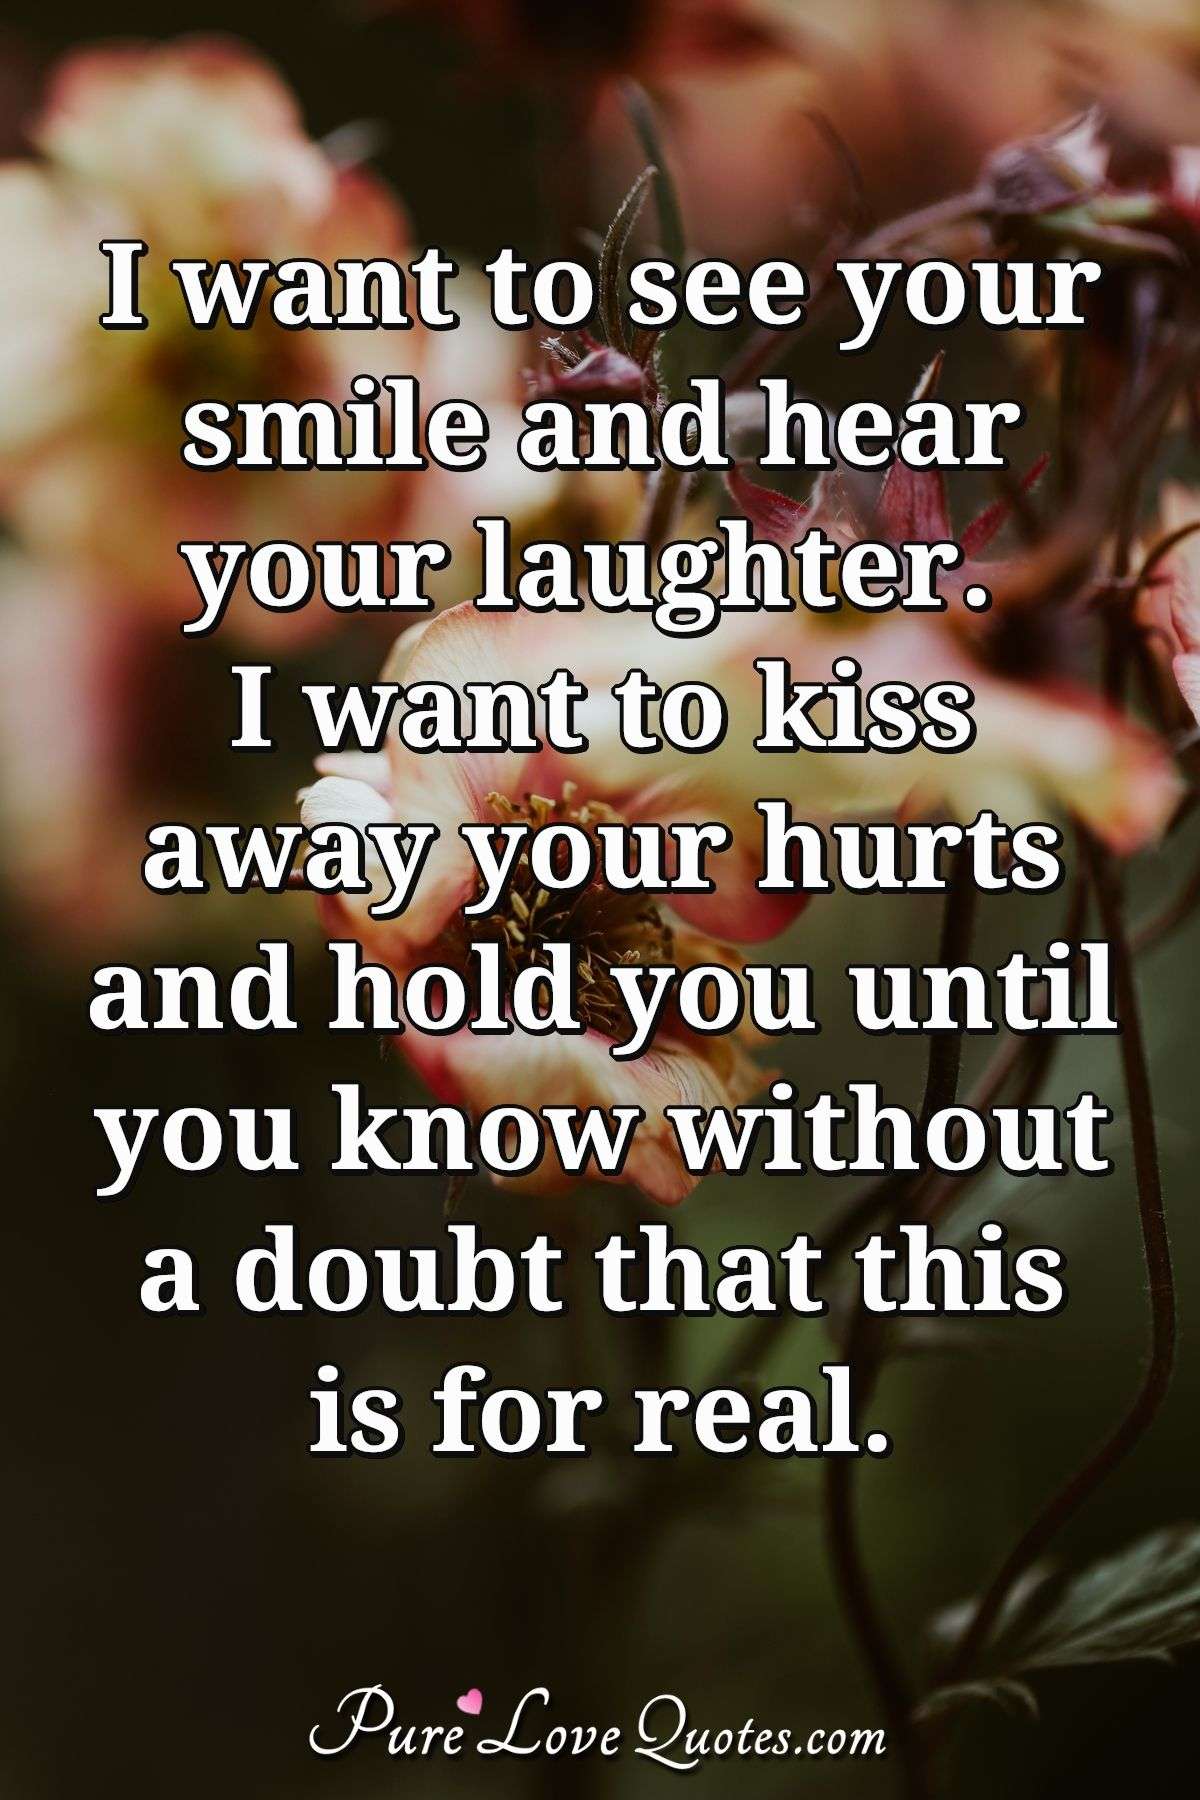 I want to see your smile and hear your laughter. I want to kiss away your hurts and hold you until you know without a doubt that this is for real. - Anonymous